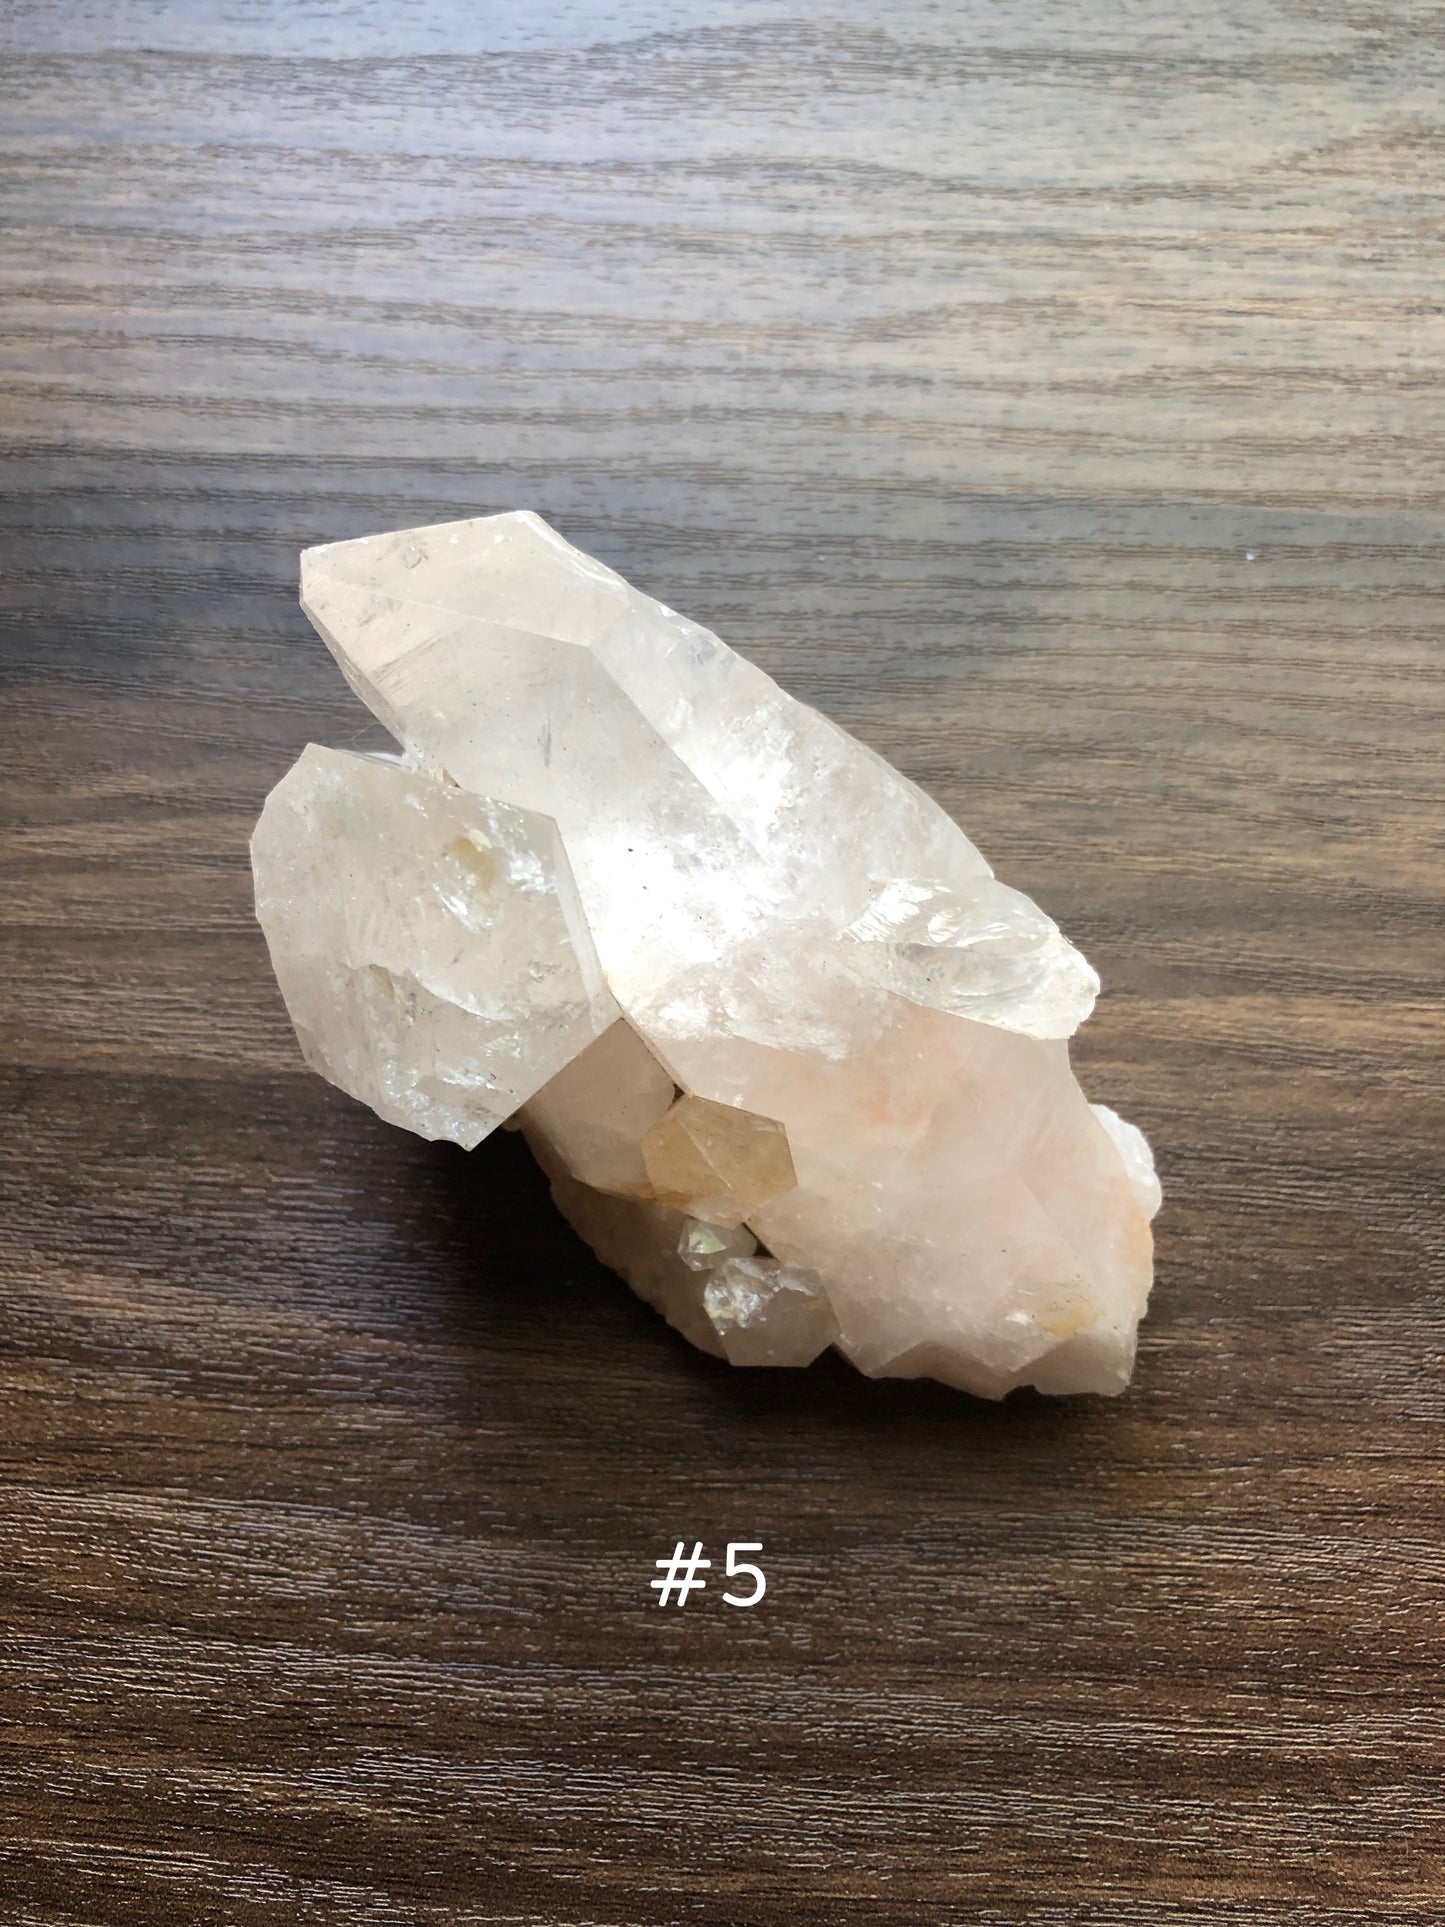 A large, rough cut quartz crystal rests on a wooden surface. It is jagged in shape with smaller crystals coming out of it. The crystal is relatively clear. The number 5 is shown on the picture.